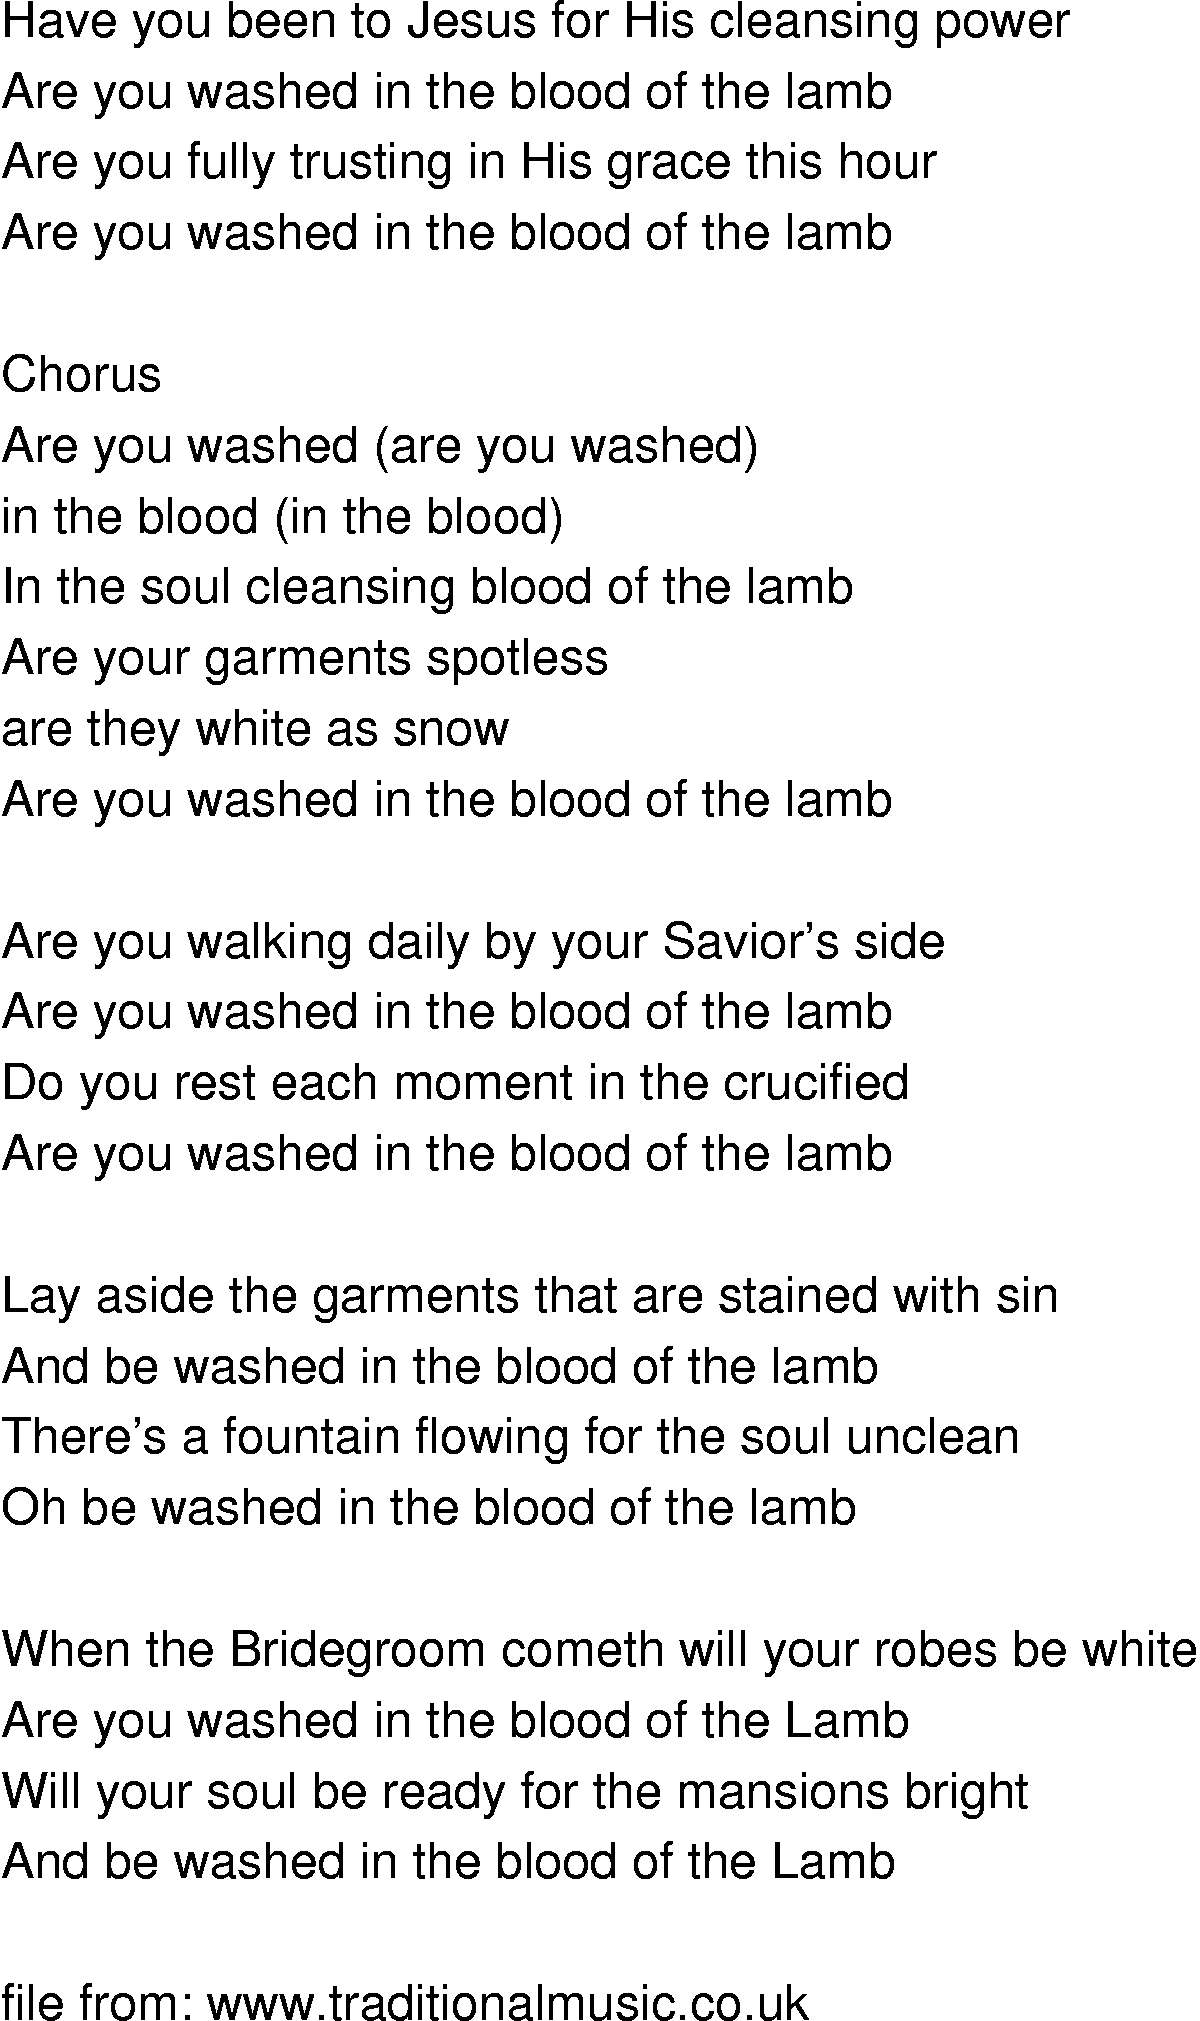 Old-Time (oldtimey) Song Lyrics - are you washed in the blood